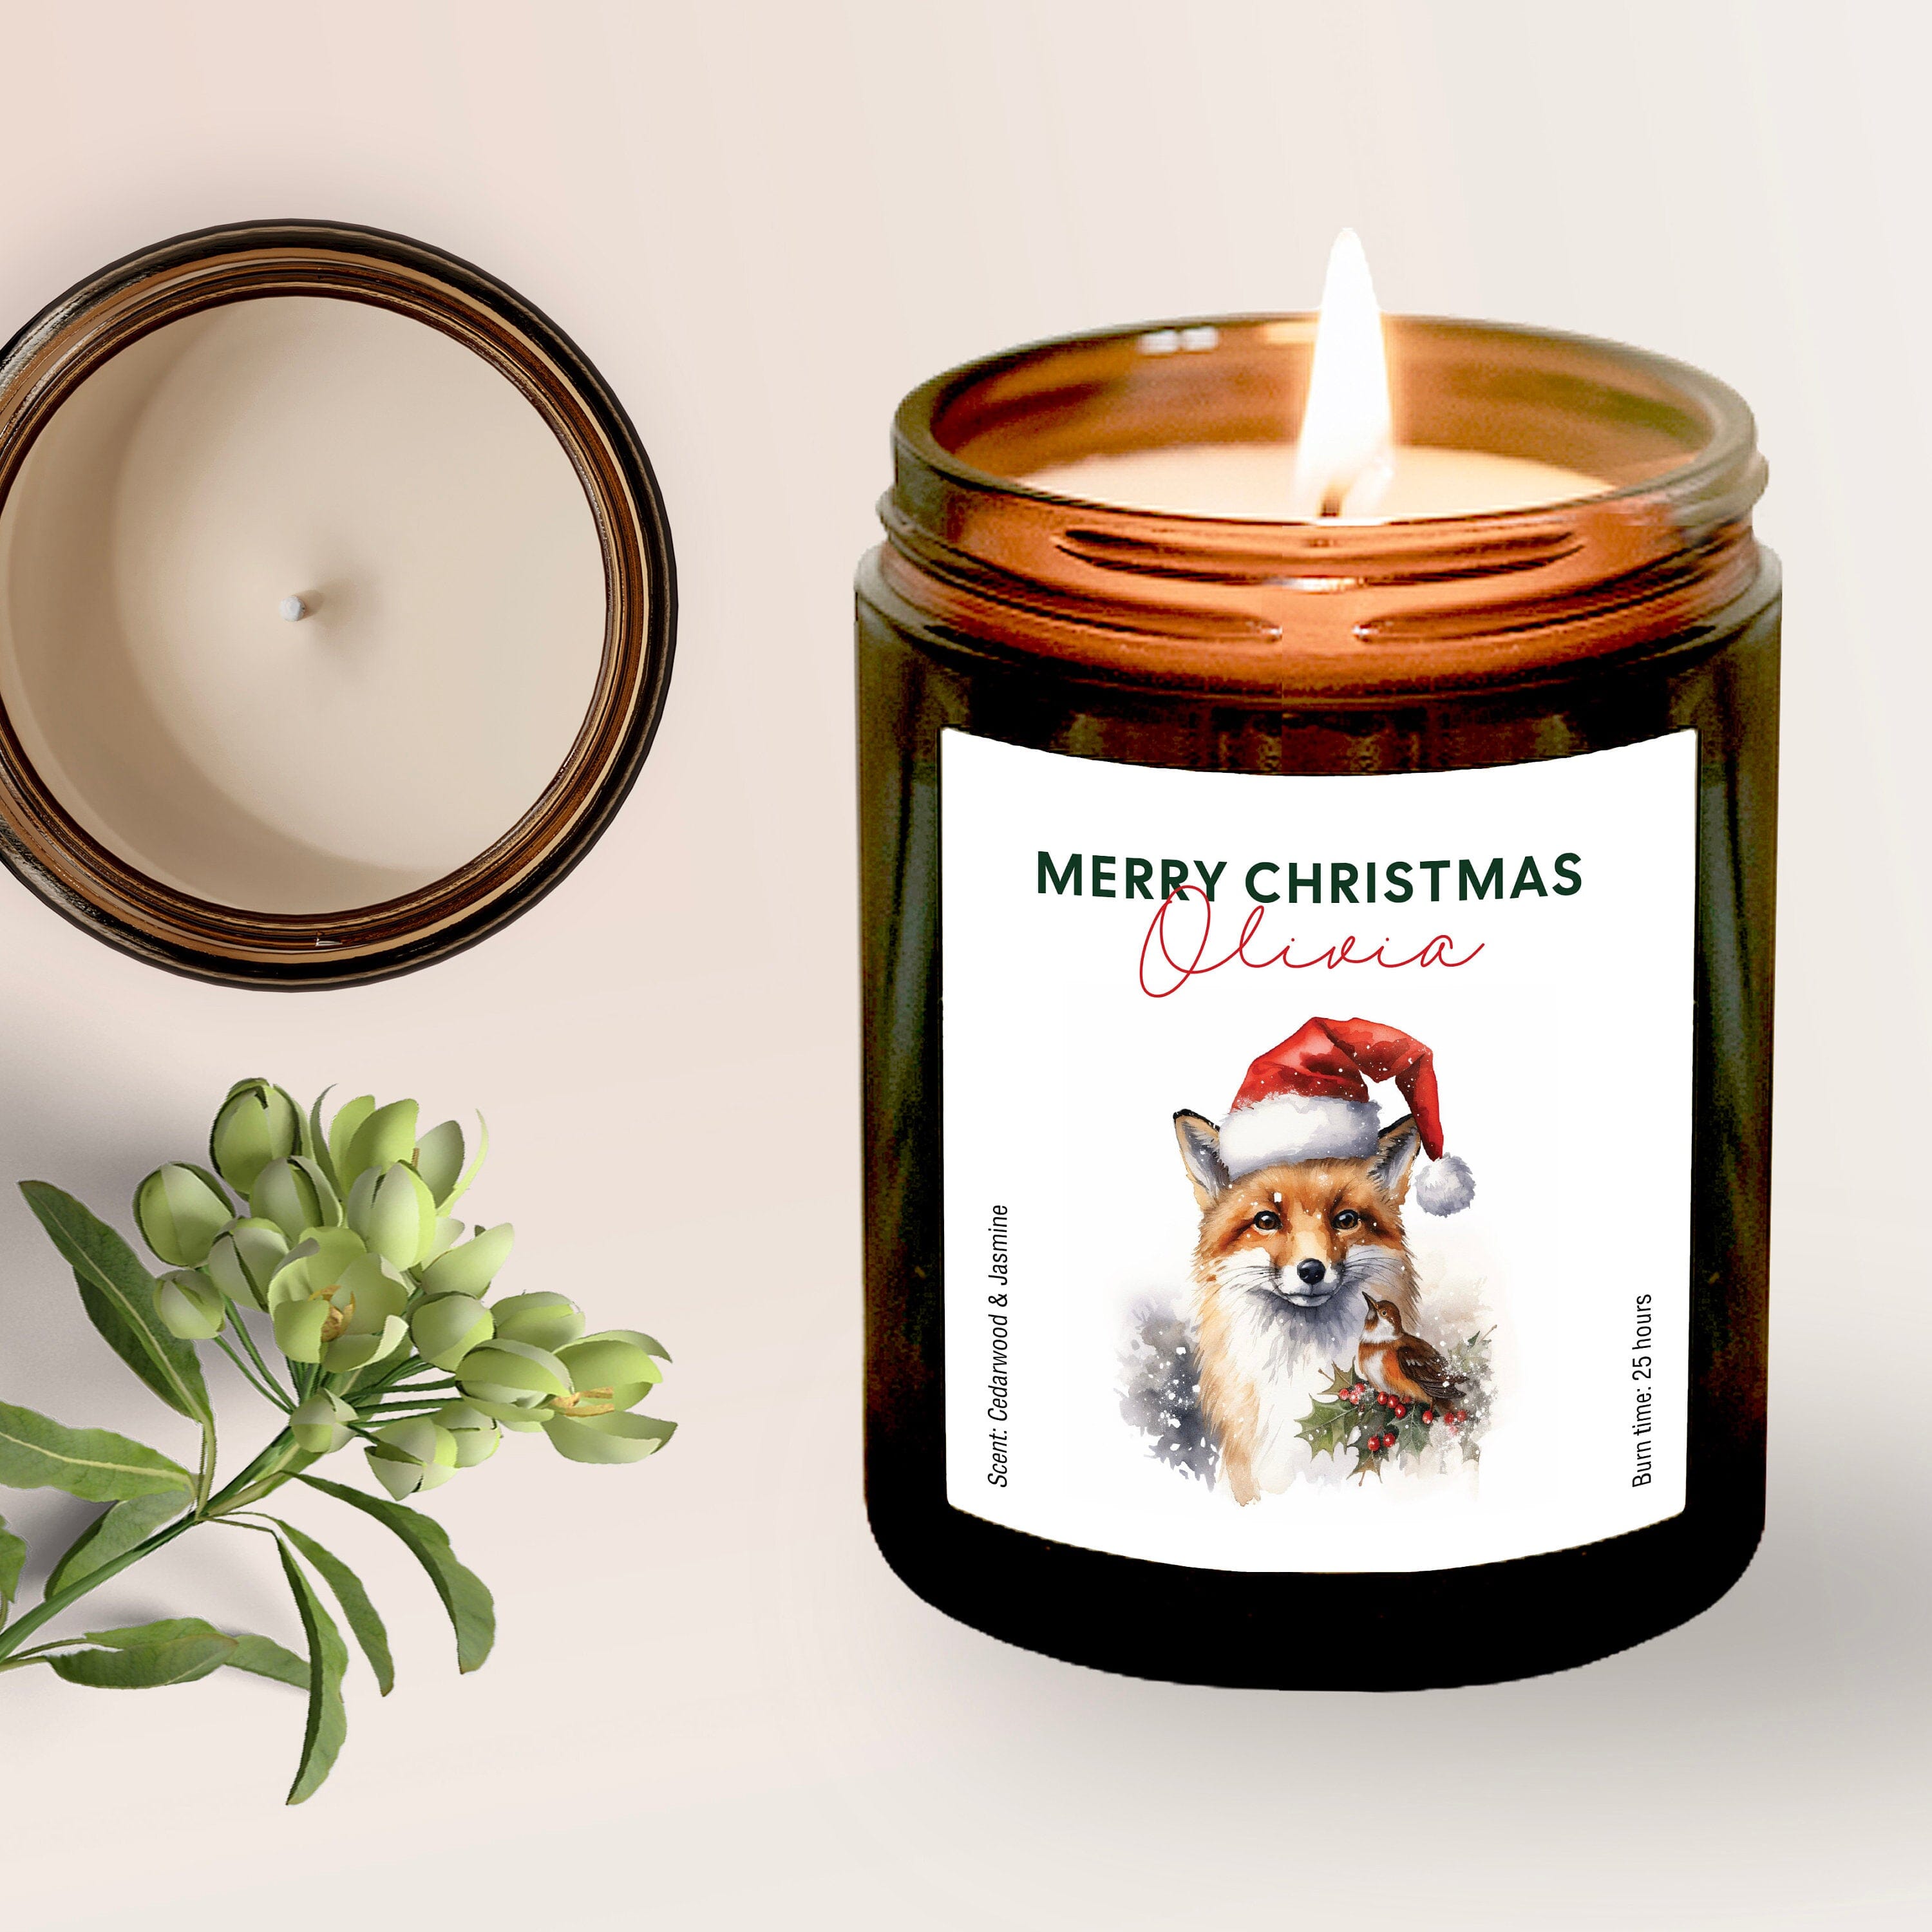 Personalised Merry Christmas Scented Candle with Fox And Robin Bird w Santa Hat, Gift for Her Him Holiday Season Cosy Gift